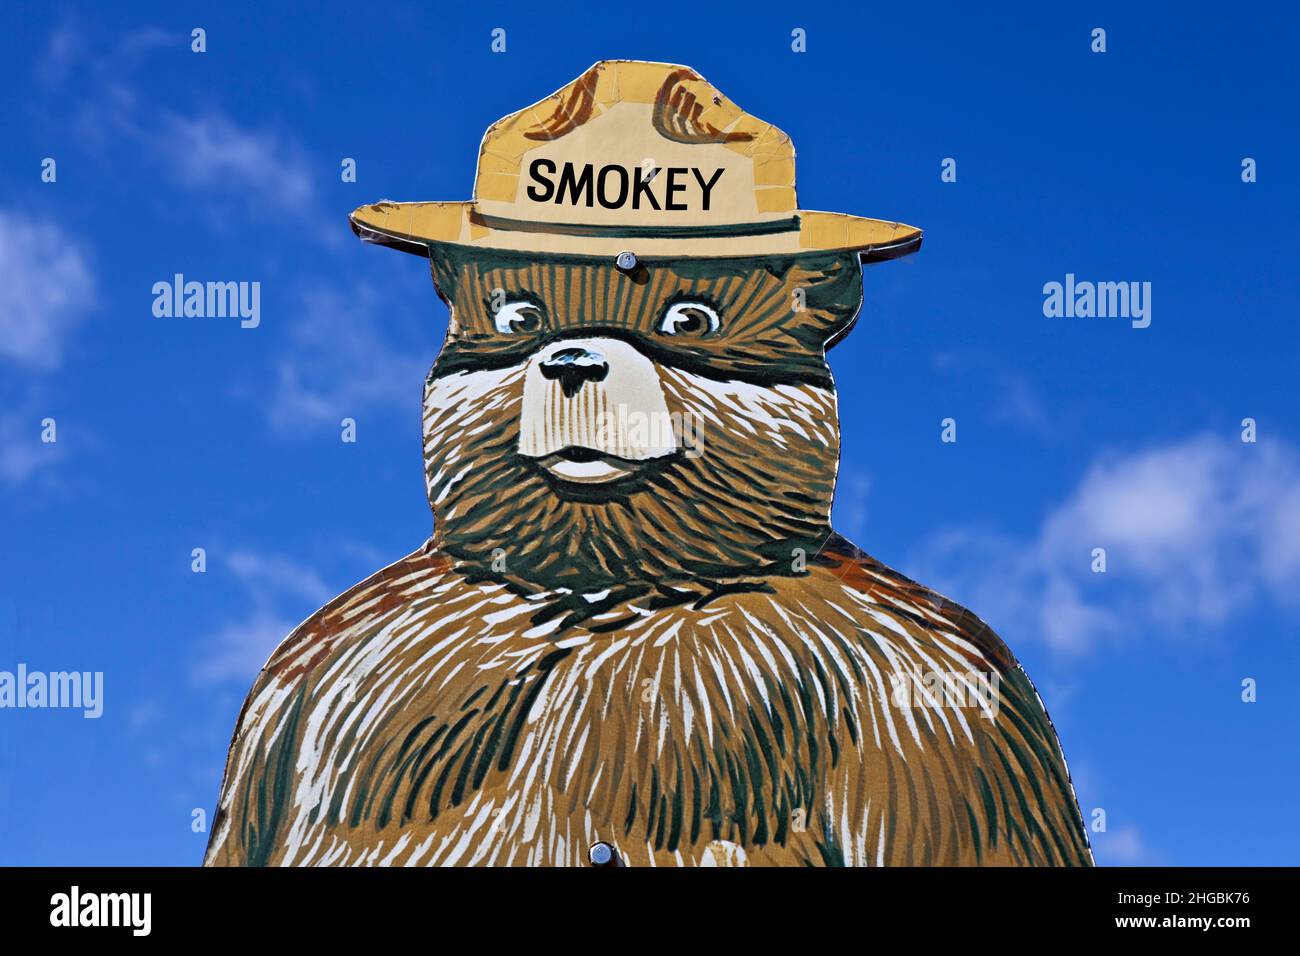 Smokey the Bear forest fire prevention sign educates children in the prevention of wild fires on April, 12, 2012 in Santa Fe, New Mexico, USA. Stock Photo